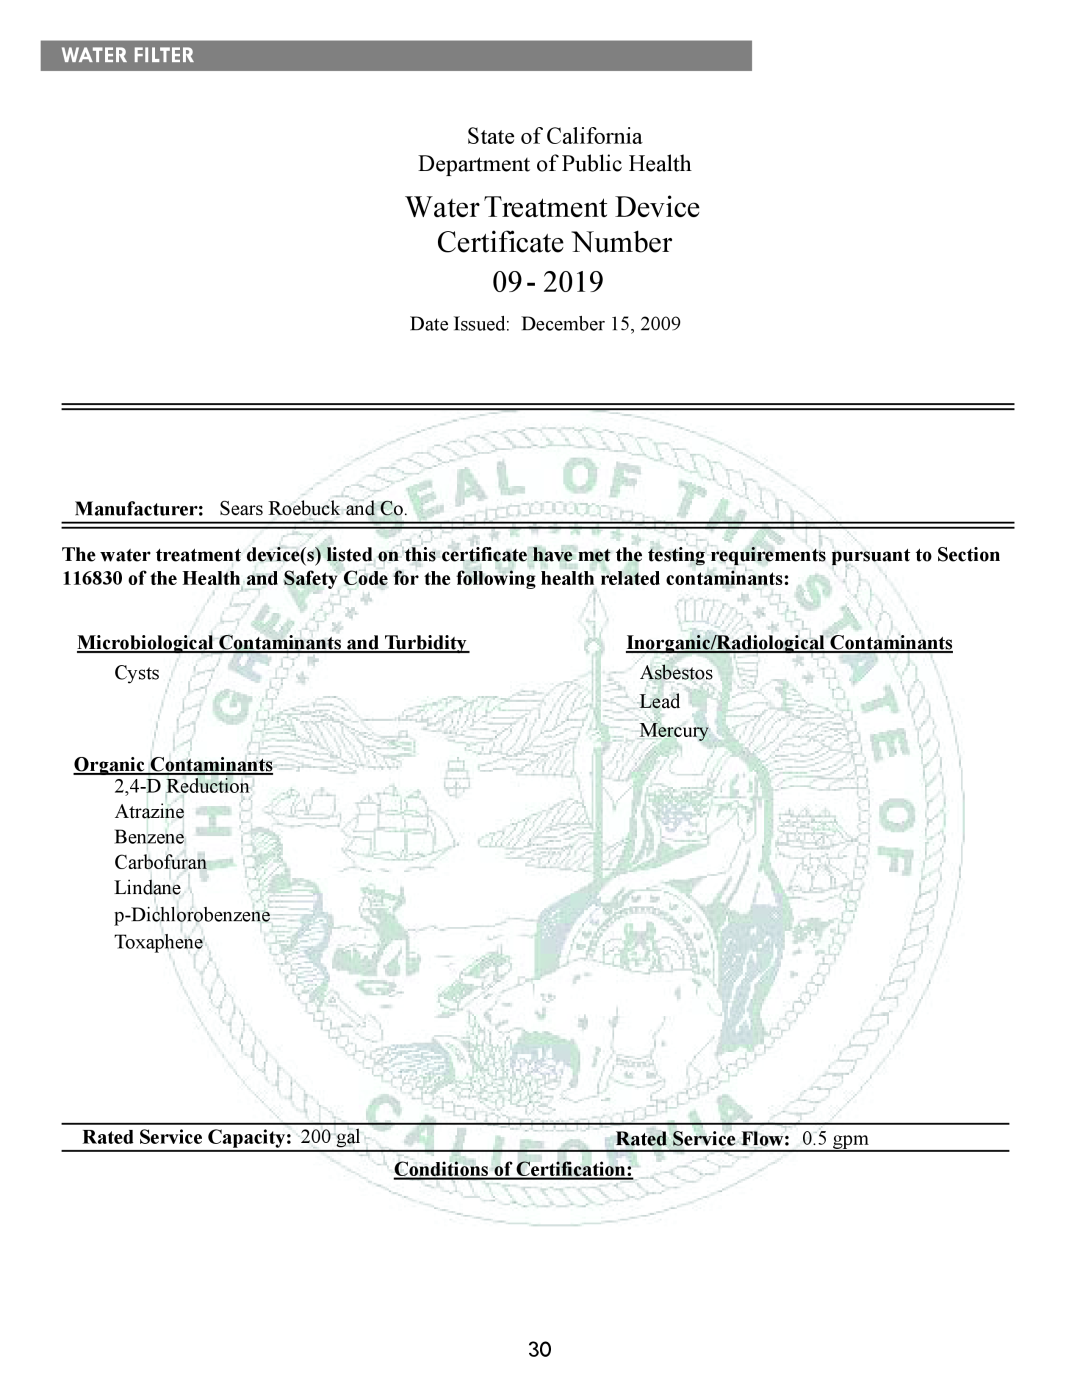 Kenmore kenmore Water Treatment Device Certificate Number, State of California Department of Public Health, Water Filter 